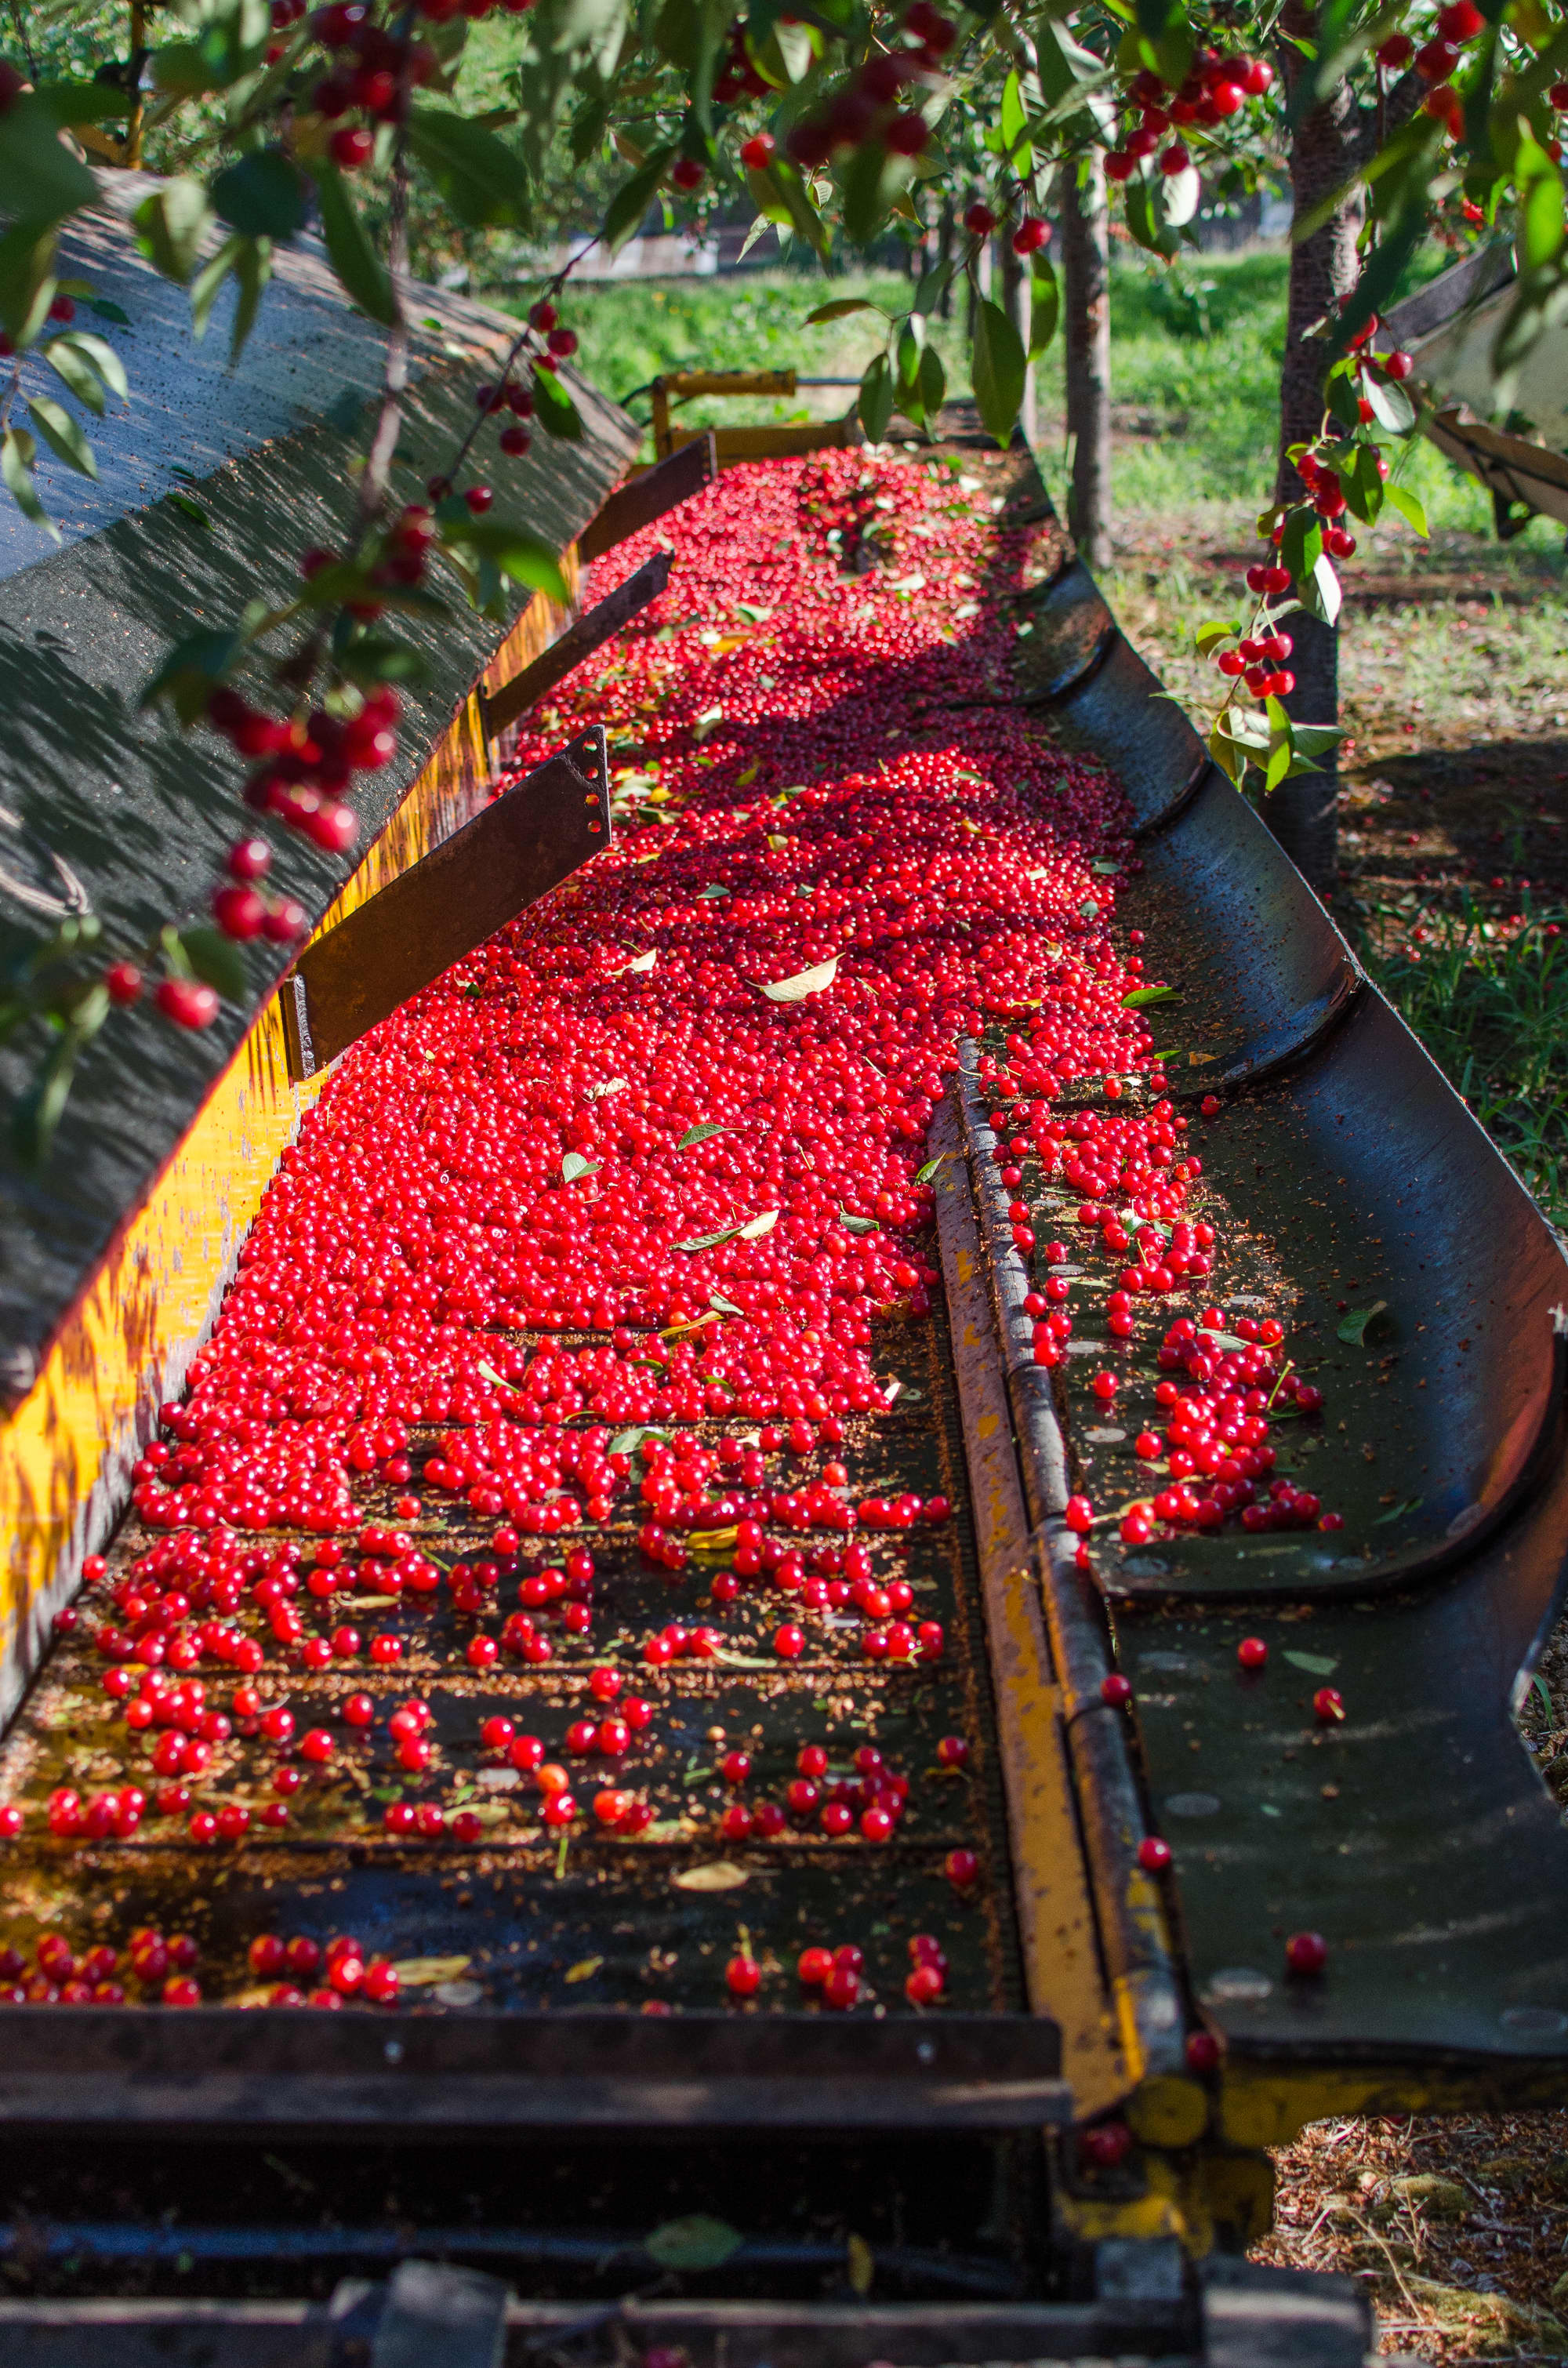 How Tart Cherries Are Grown in Michigan: And Why You Should Look for ...